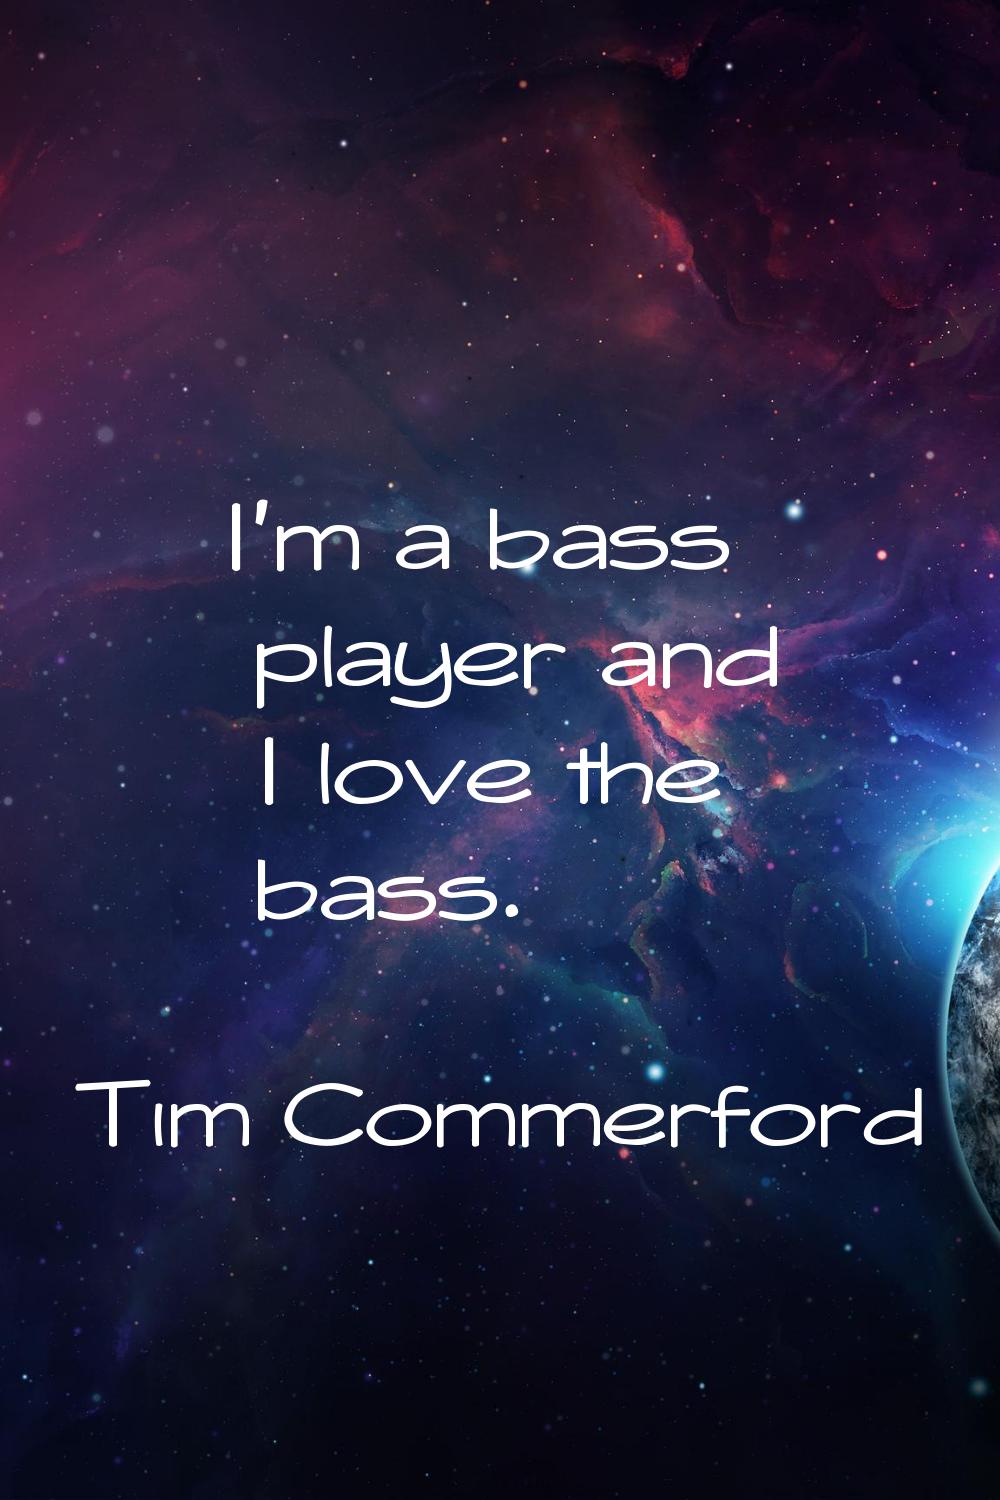 I'm a bass player and I love the bass.